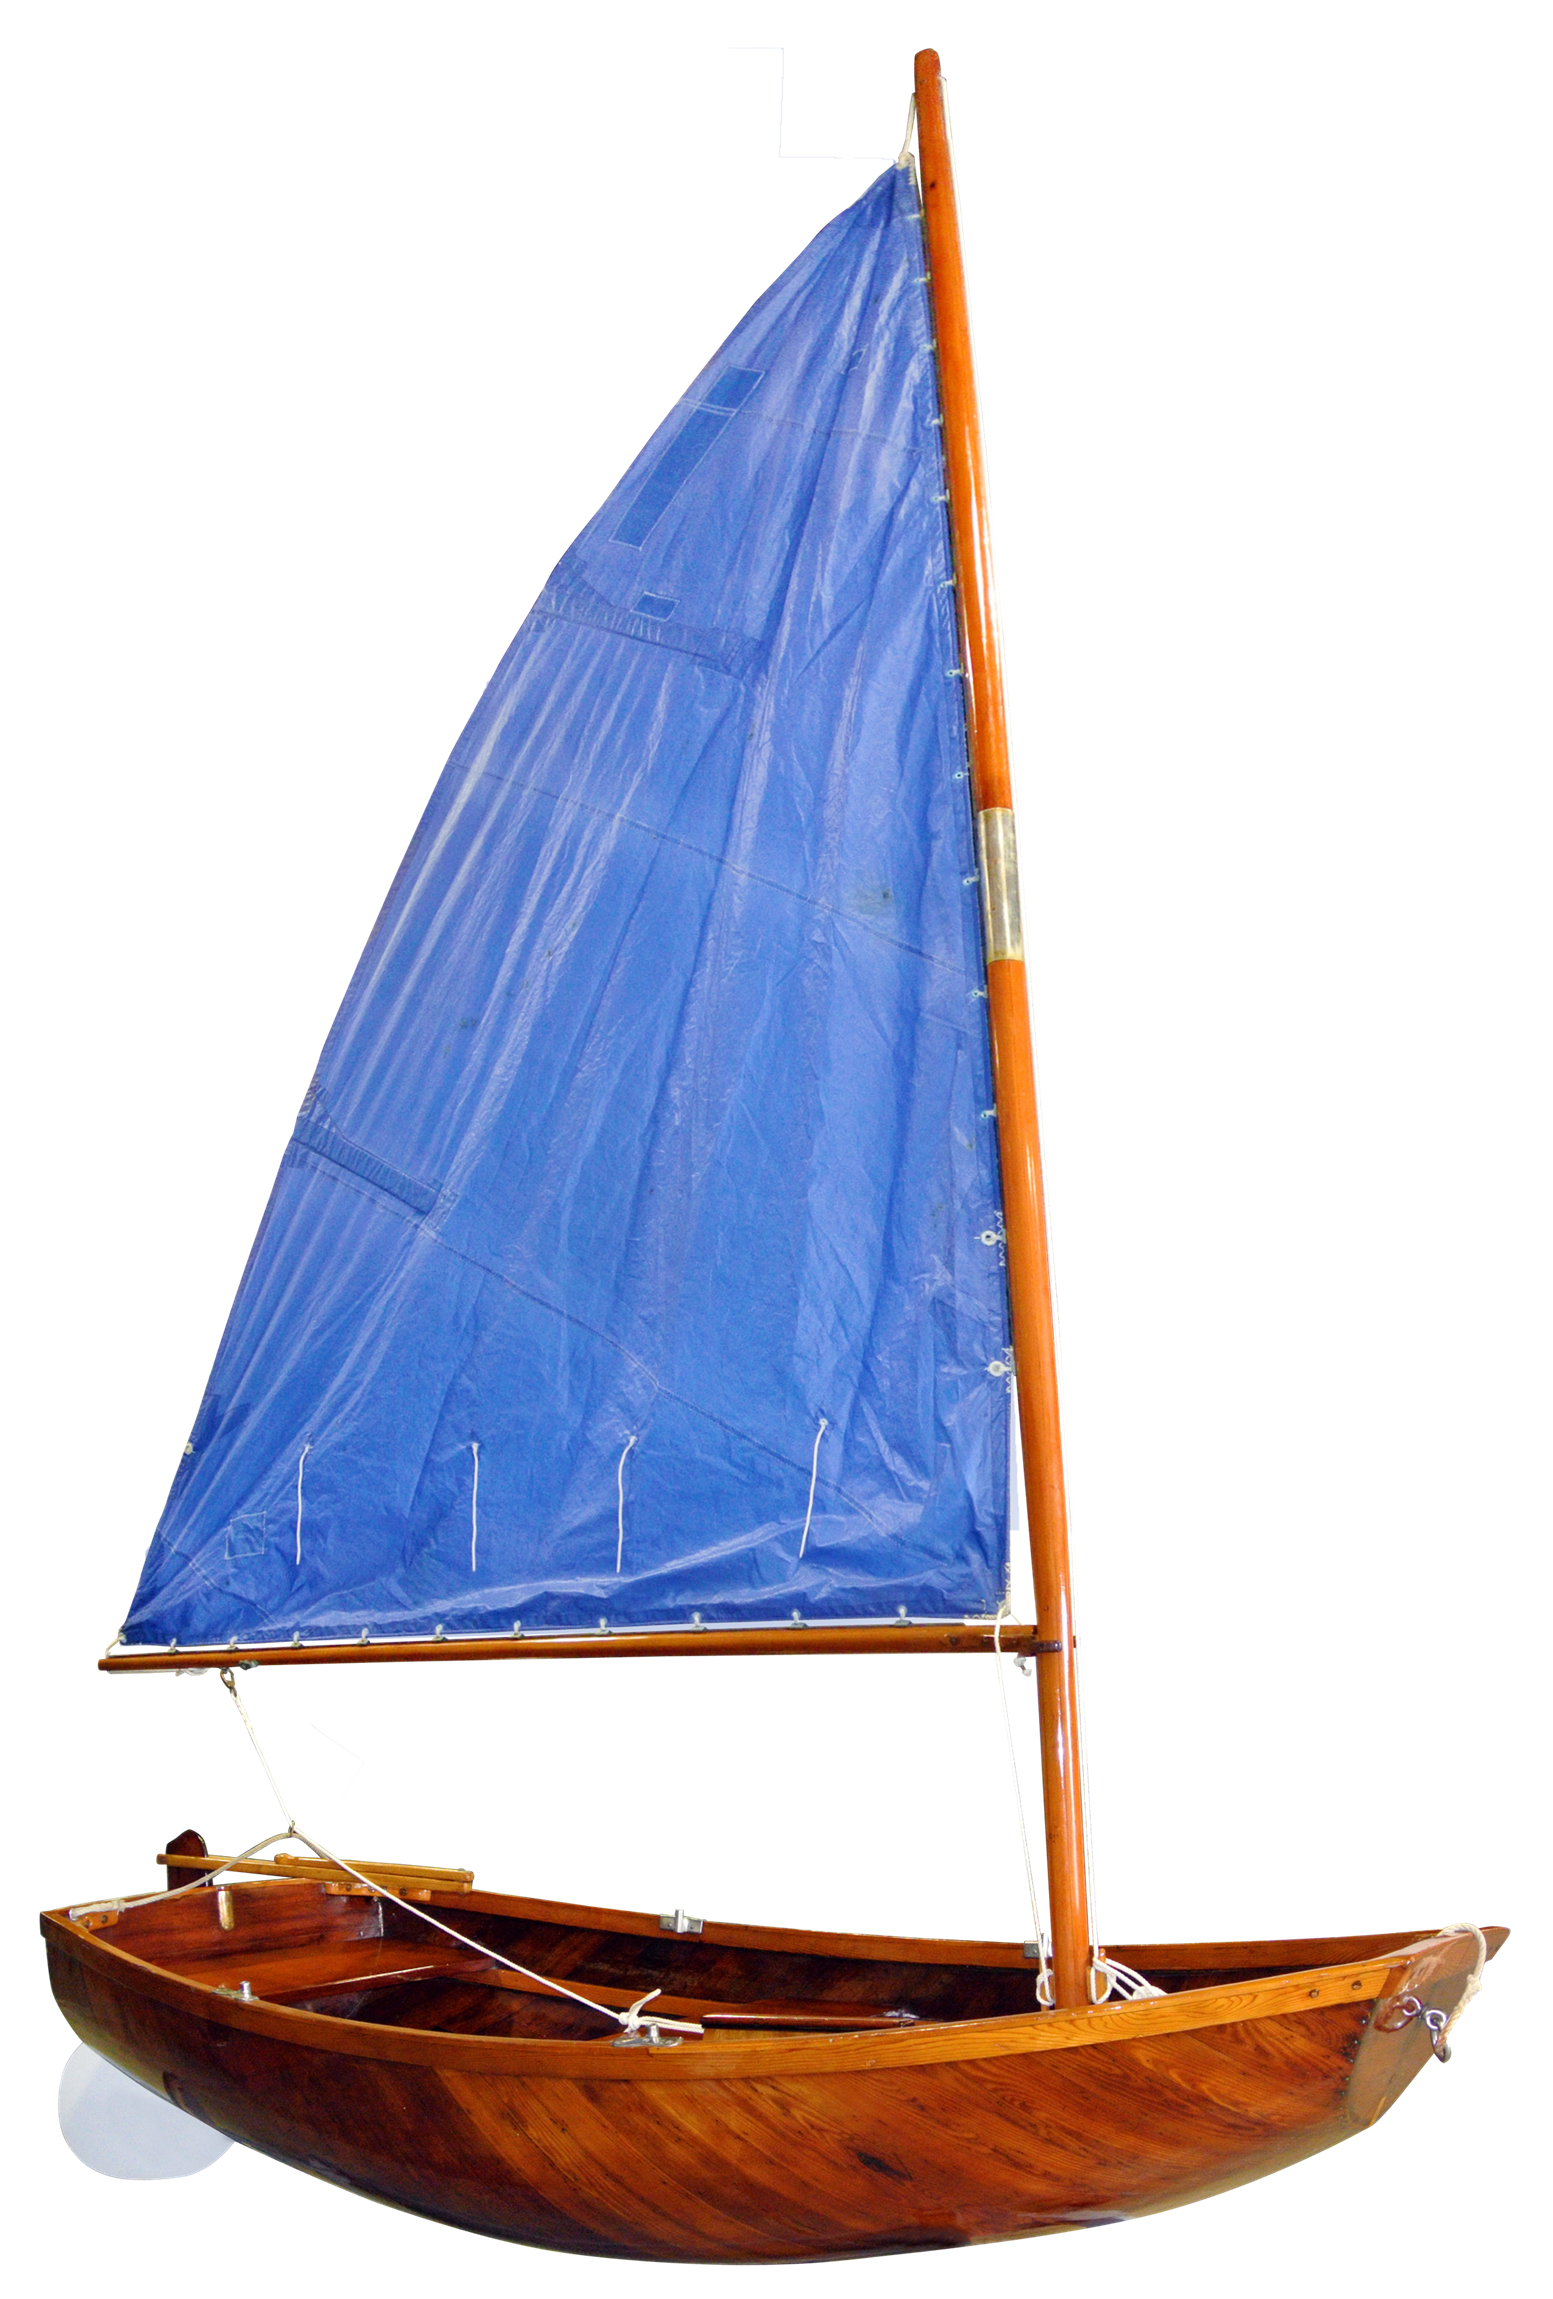 Yacht voile PNG image Transparente image